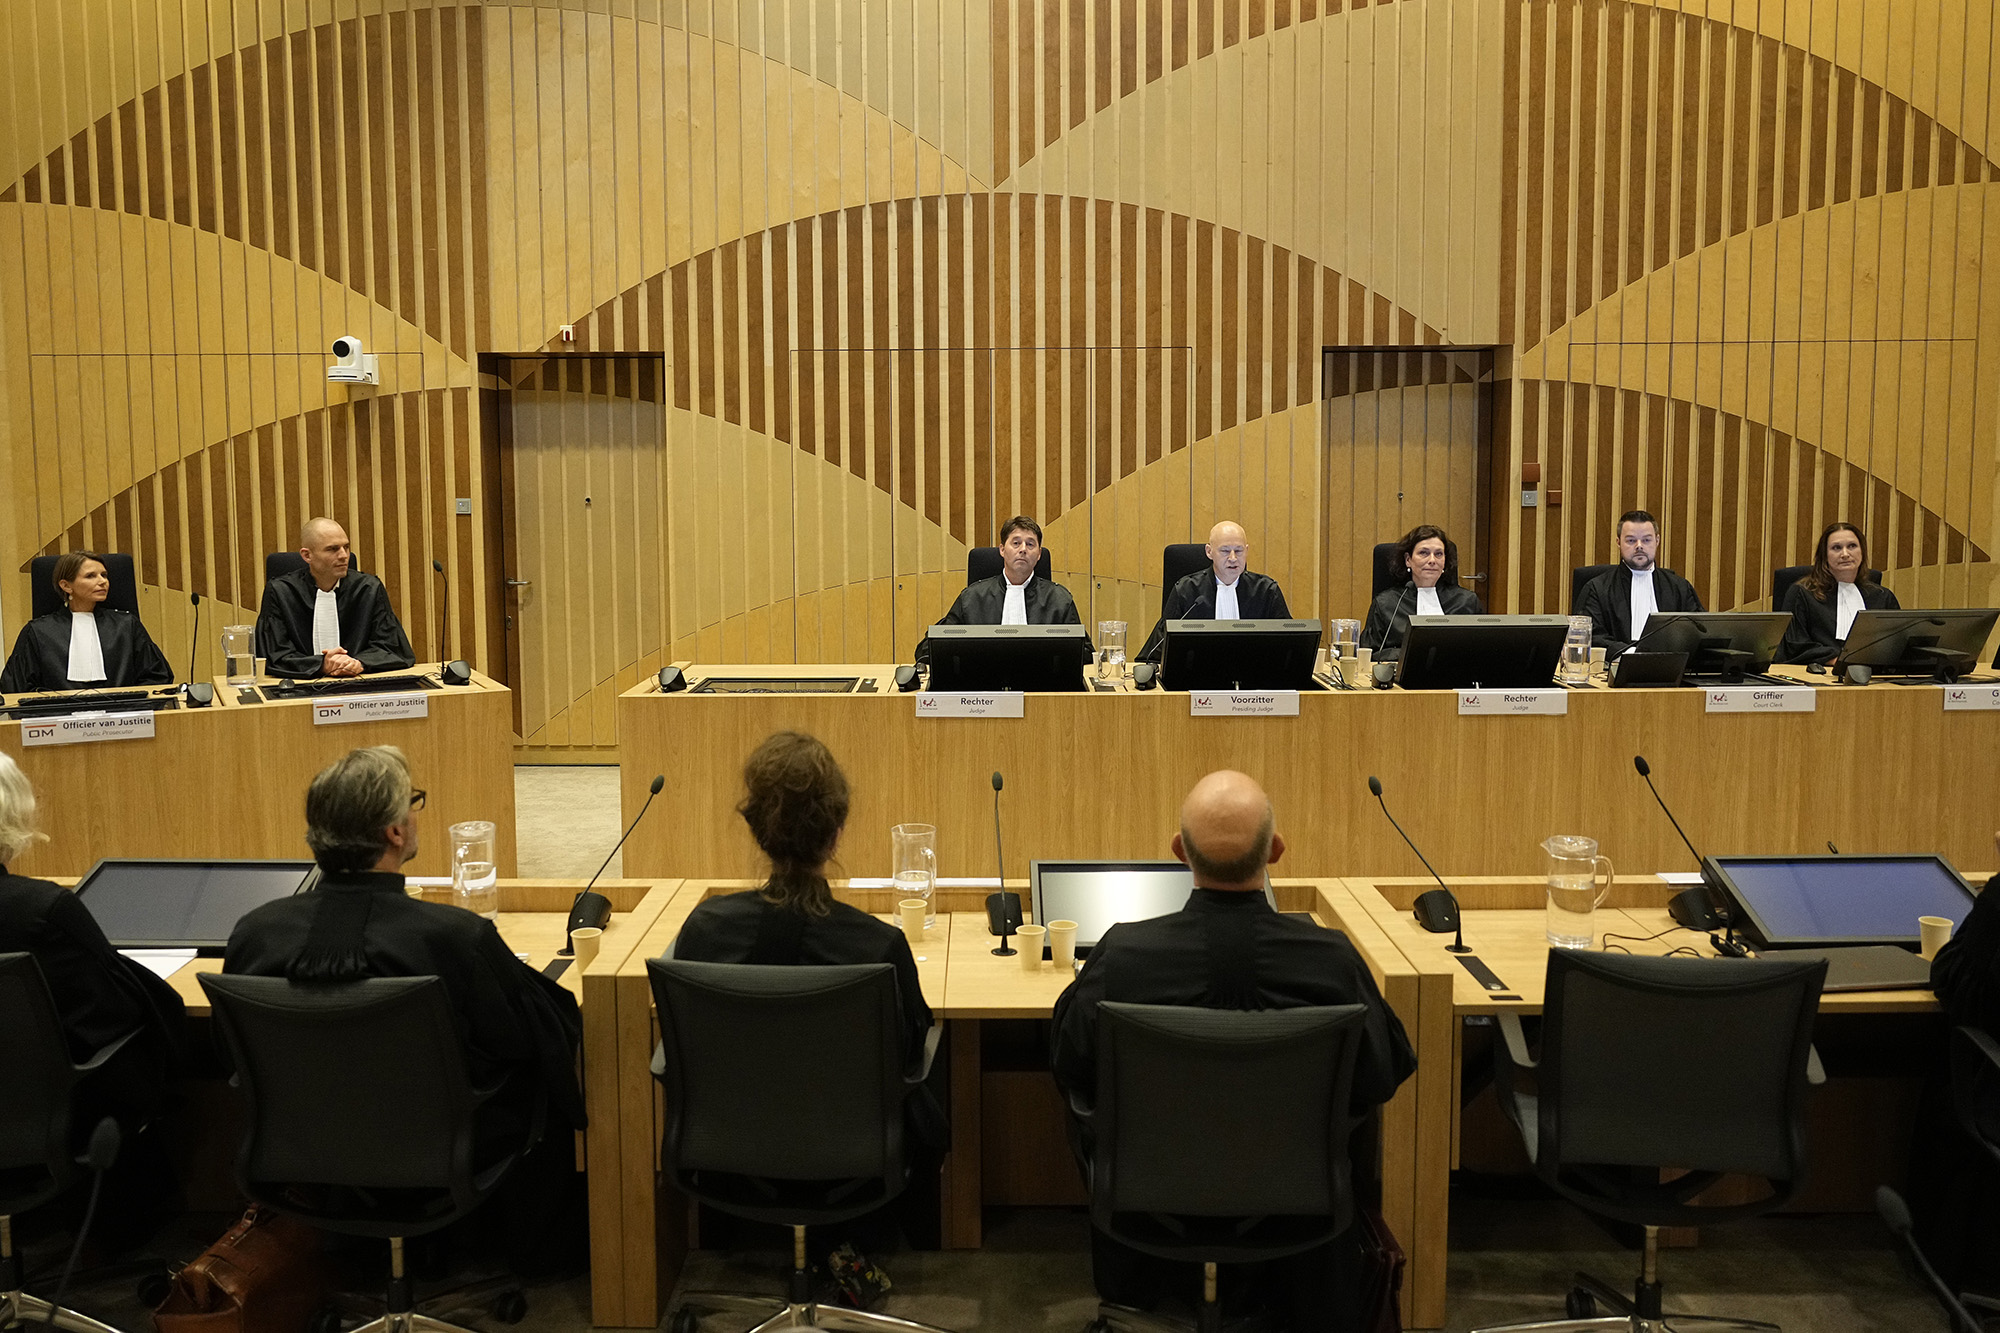 Presiding judge Hendrik Steenhuis, fourth from right, speaks during the verdict session of the Malaysia Airlines Flight 17 trial at the high security court at Schiphol airport, Netherlands, on November 17.